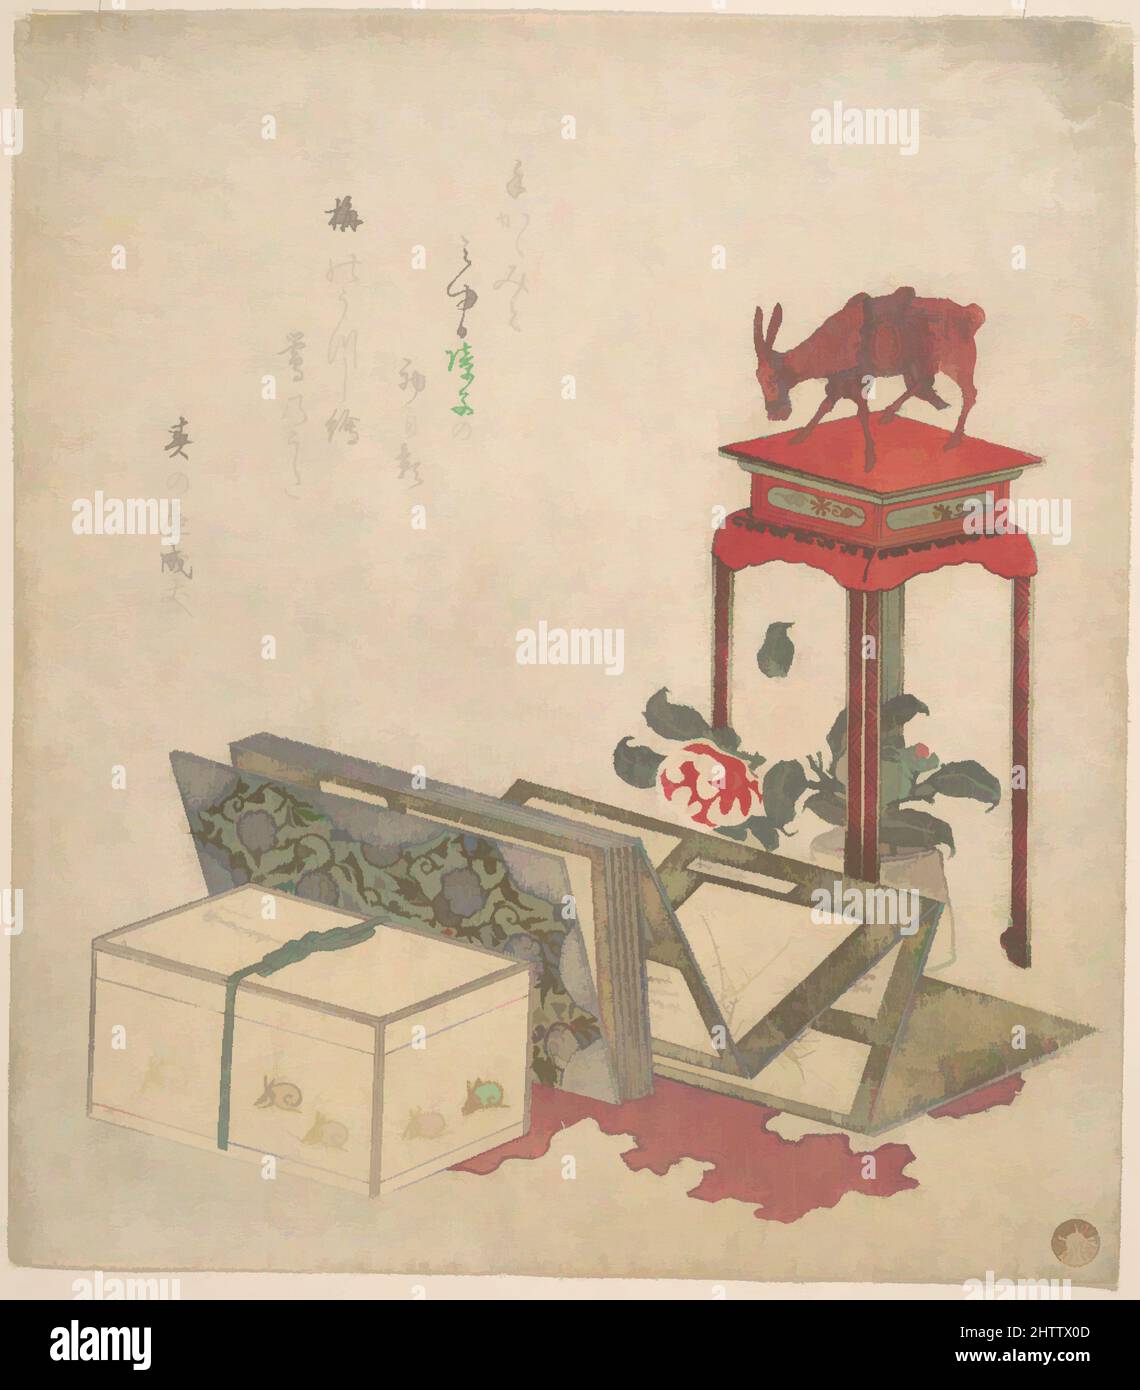 Art inspired by Still life, Edo period (1615–1868), Japan, Polychrome woodblock print (surimono); ink and color on paper, 8 9/16 x 7 5/8 in. (21.7 x 19.4 cm), Prints, Unidentified Artist, Classic works modernized by Artotop with a splash of modernity. Shapes, color and value, eye-catching visual impact on art. Emotions through freedom of artworks in a contemporary way. A timeless message pursuing a wildly creative new direction. Artists turning to the digital medium and creating the Artotop NFT Stock Photo